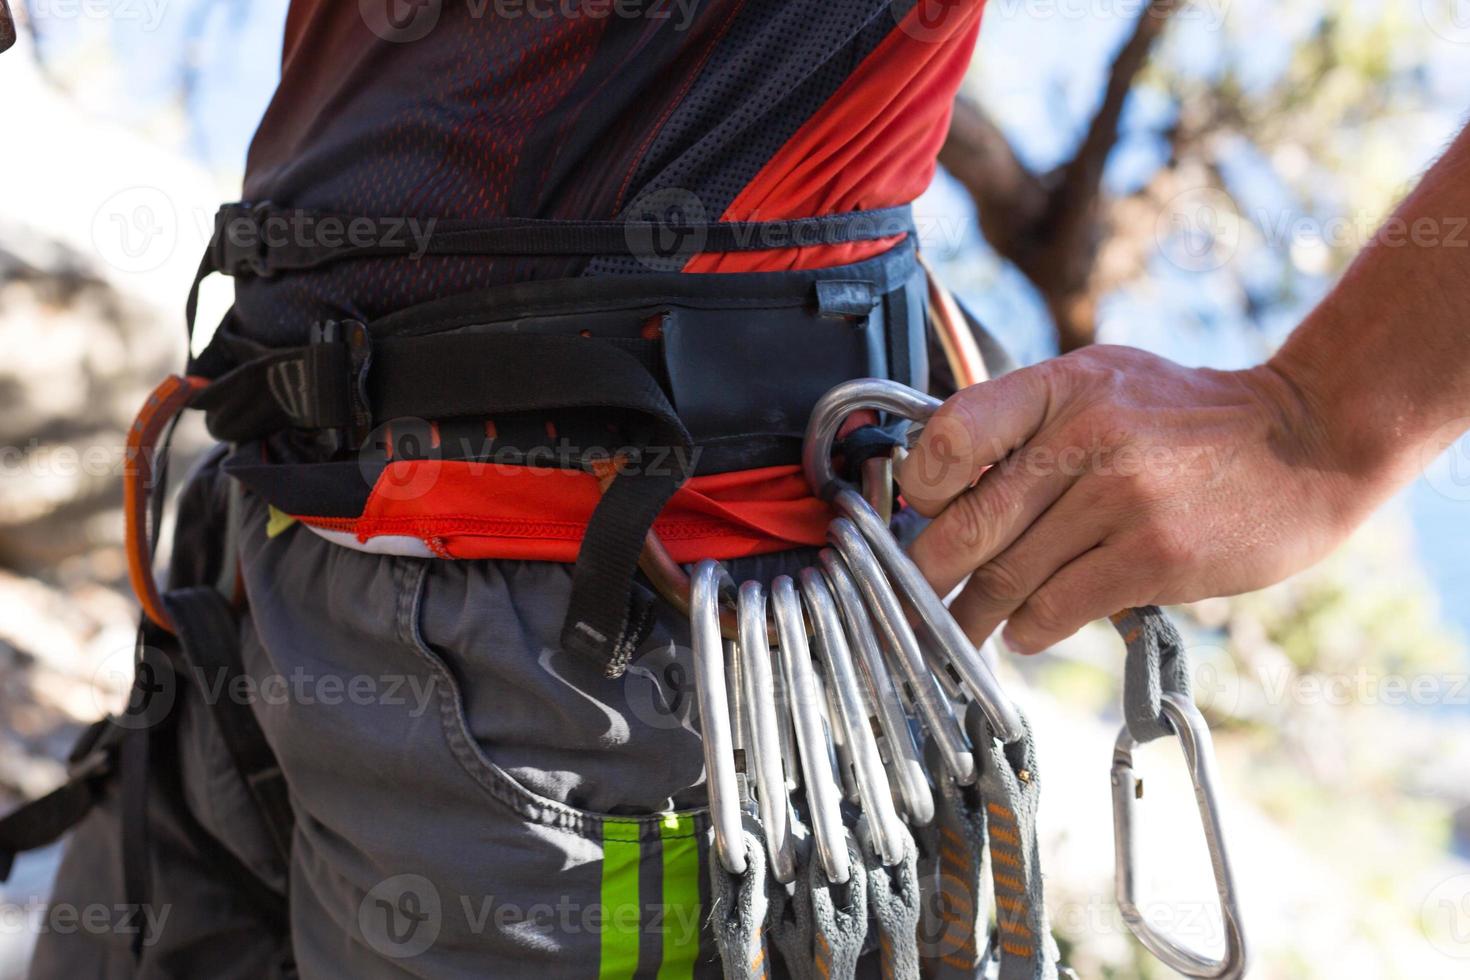 Climbing equipment on a male climber rock shoes, rope, quickdraw, safety device, harness. Sports mountain tourism, active lifestyle, extreme sports photo